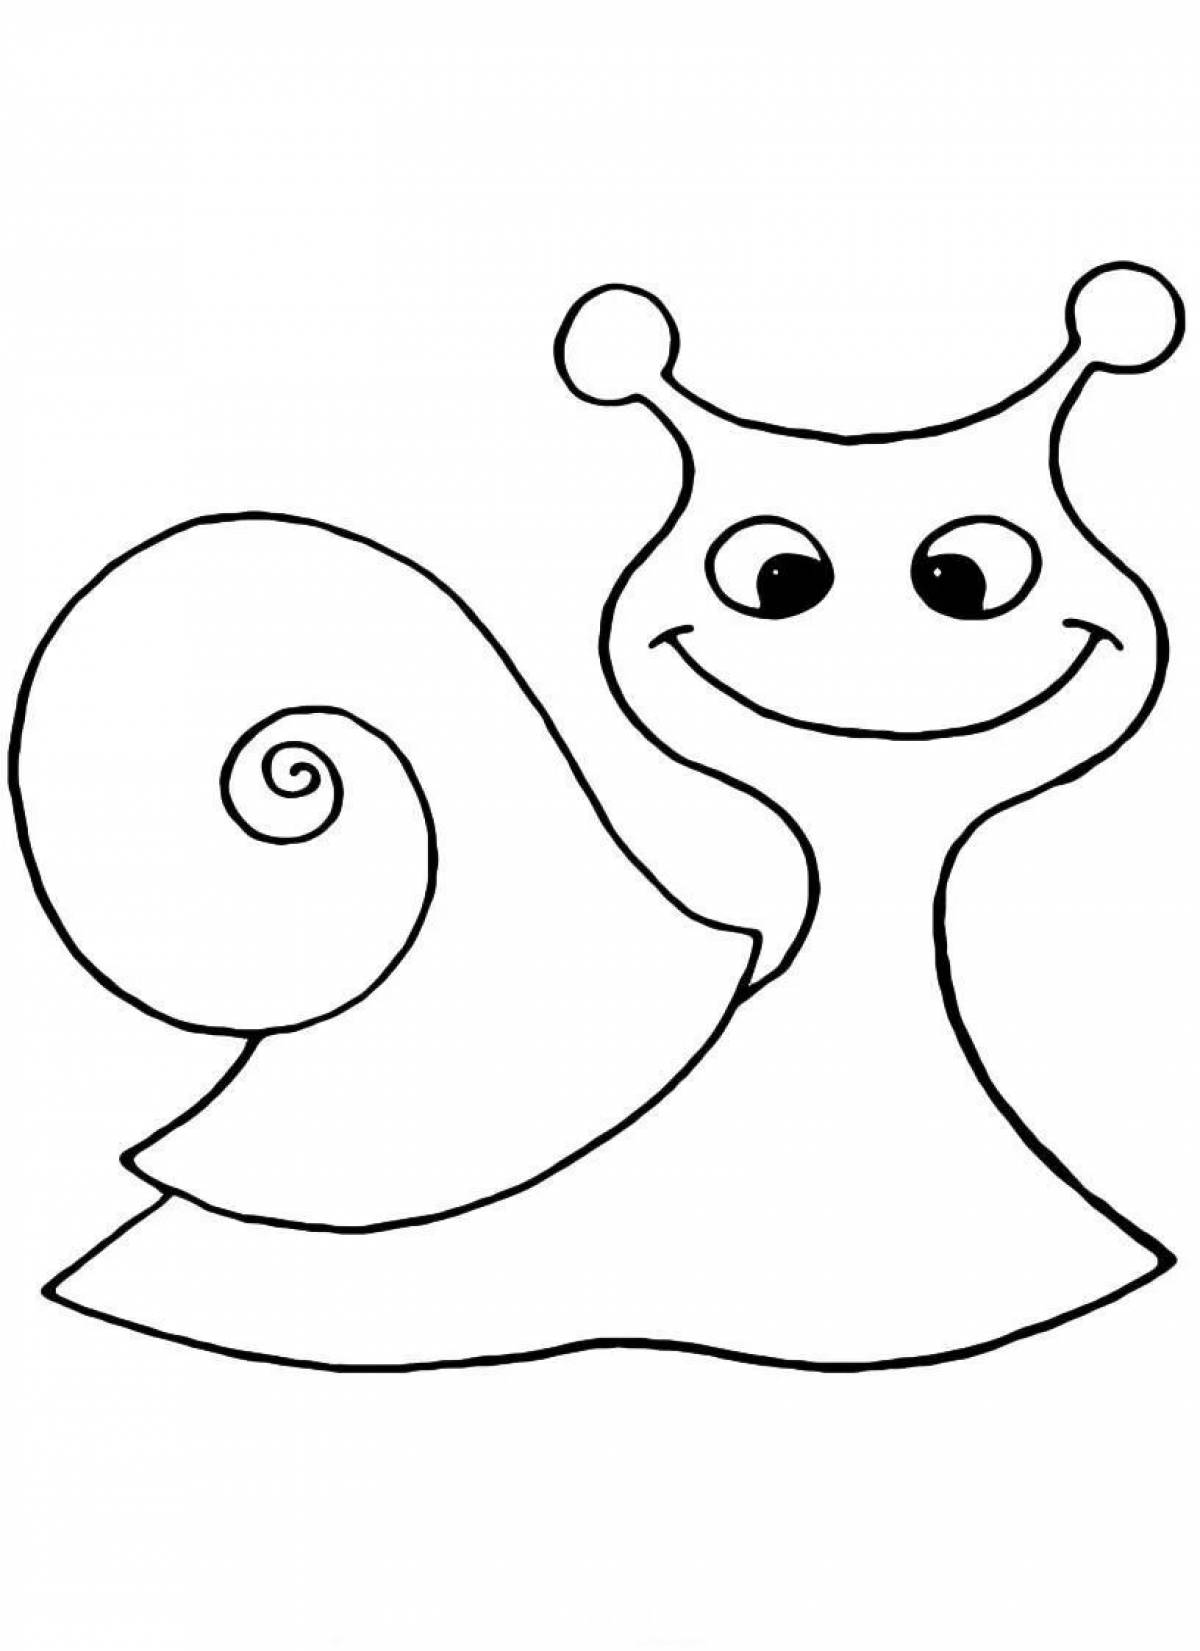 Colored glowing snail coloring book for children 3-4 years old